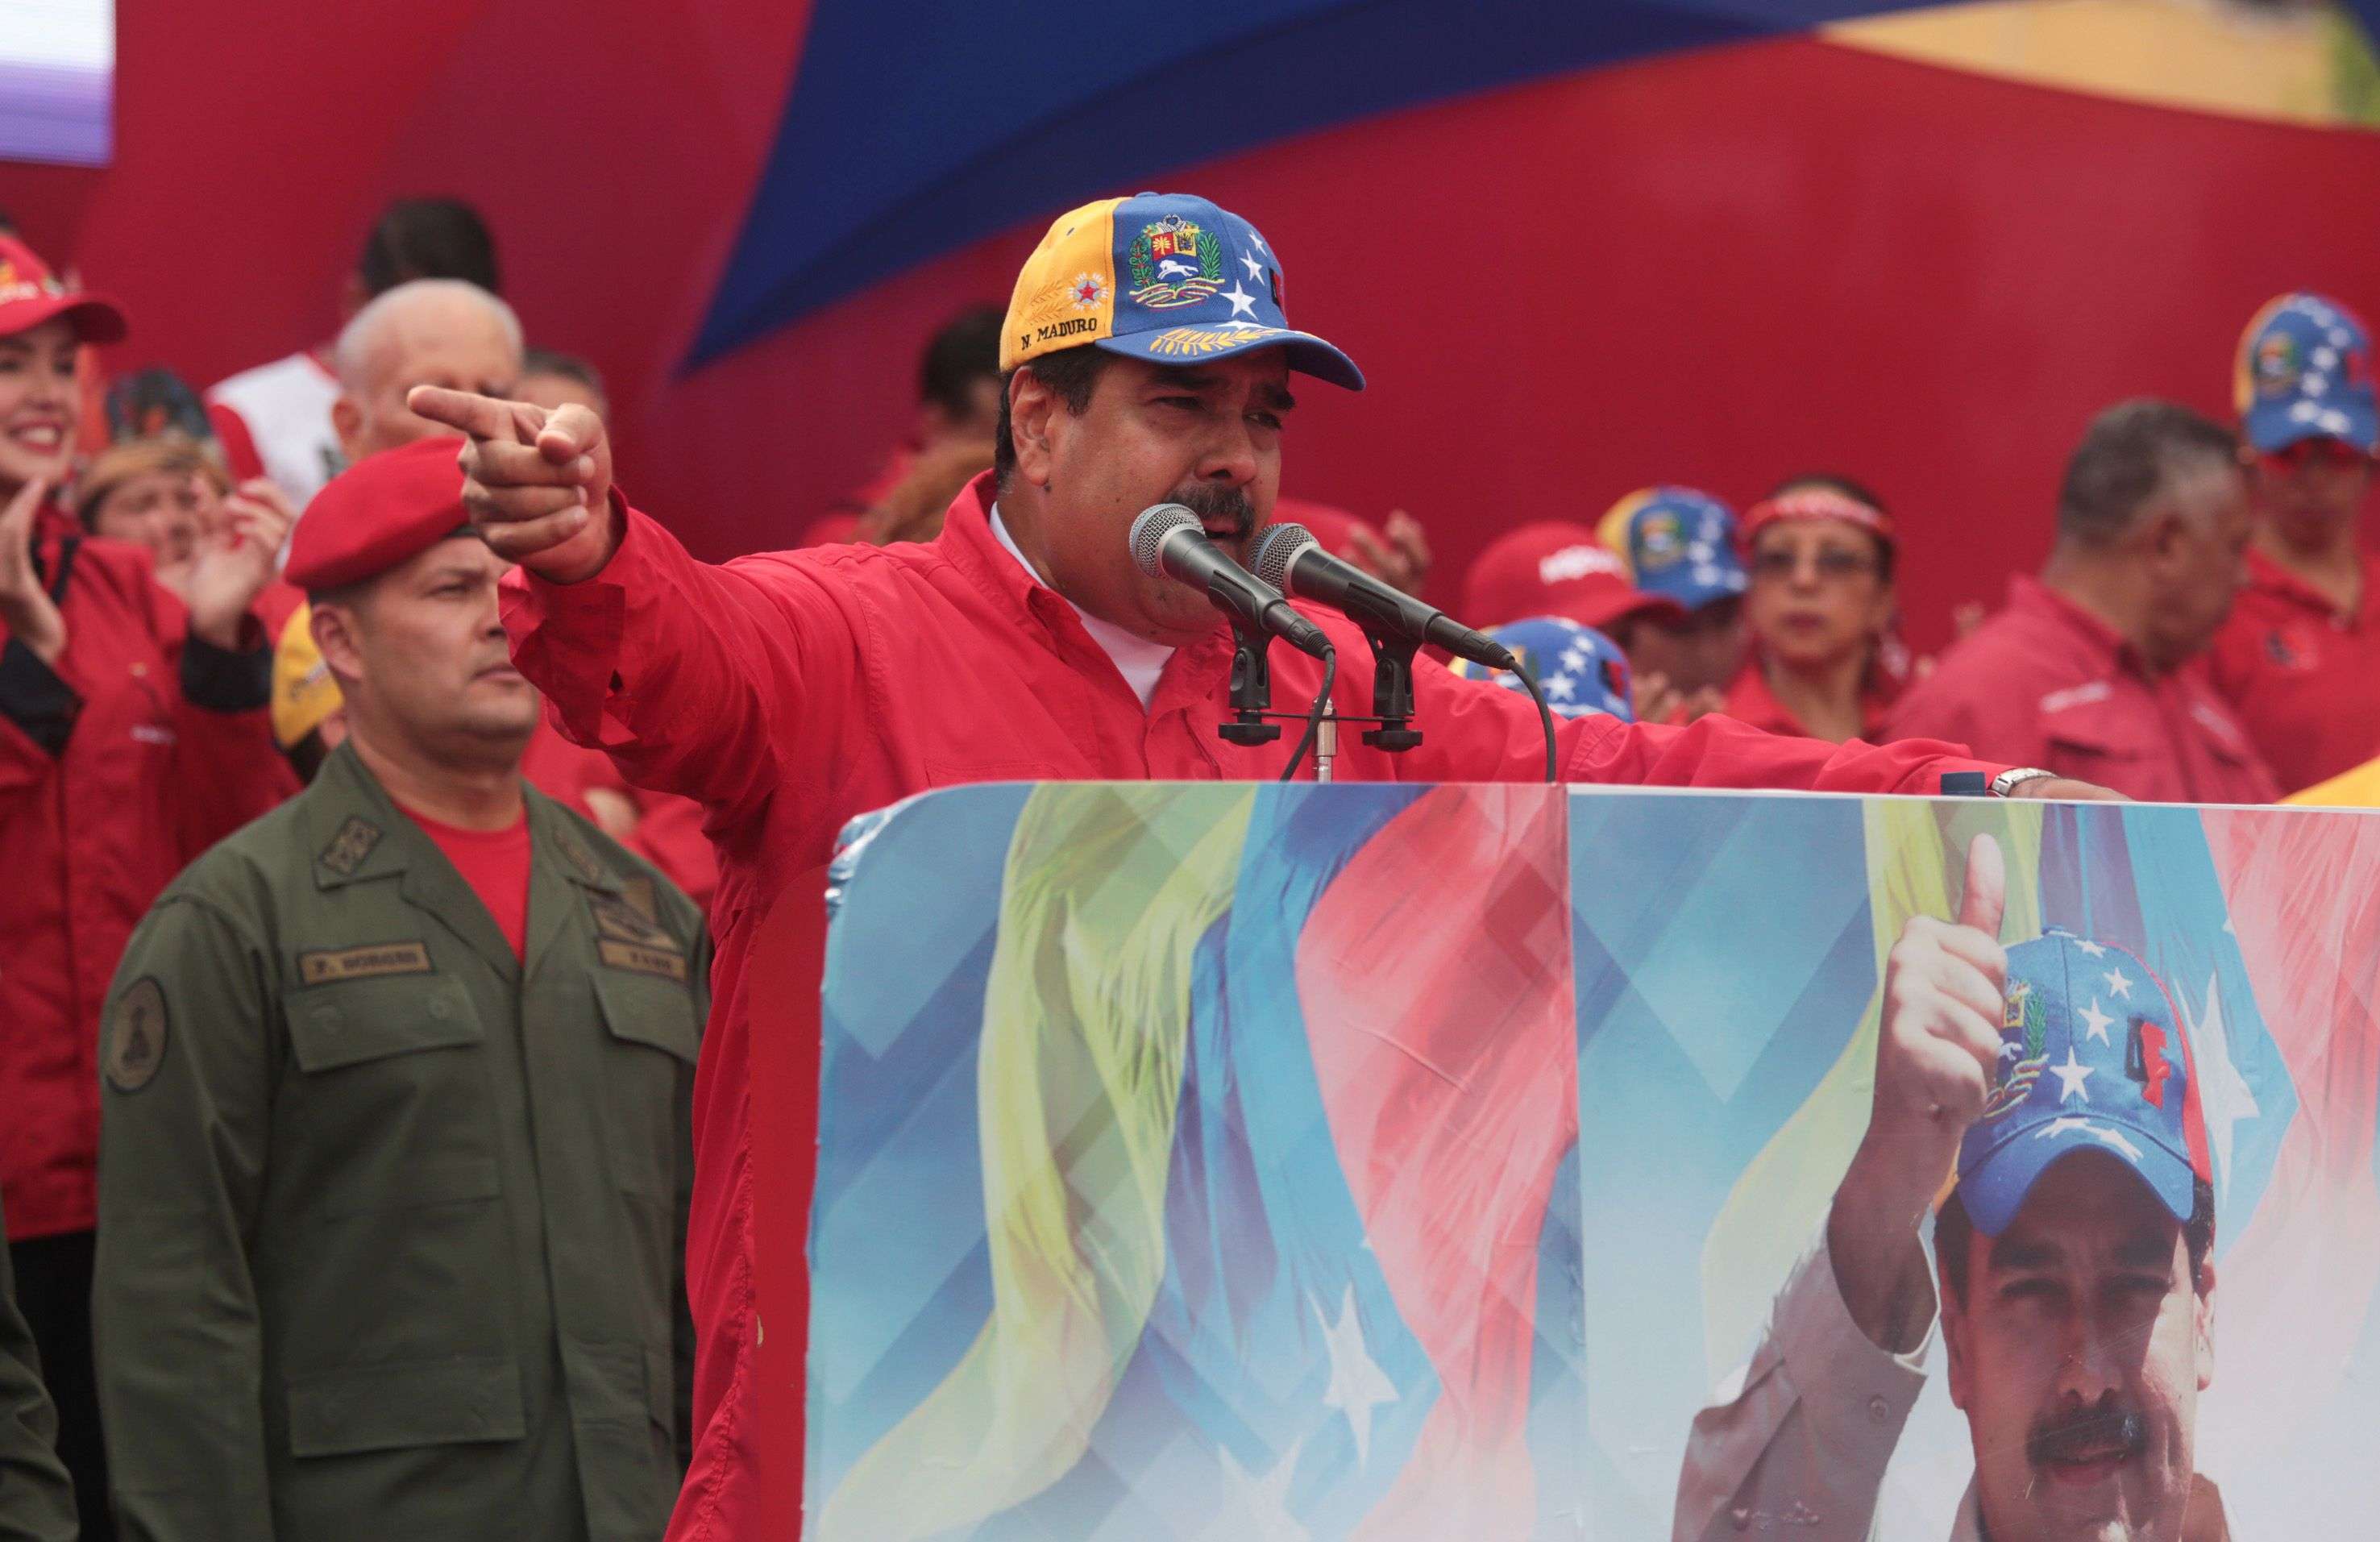 Handout picture released by the Venezuelan presidential office showing President Nicolas Maduro addressing his supporters during a rally in Caracas. The country is one of the biggest donors to the inauguration of President Donald Trump last January, plunking down US$500,000. Photo: AFP